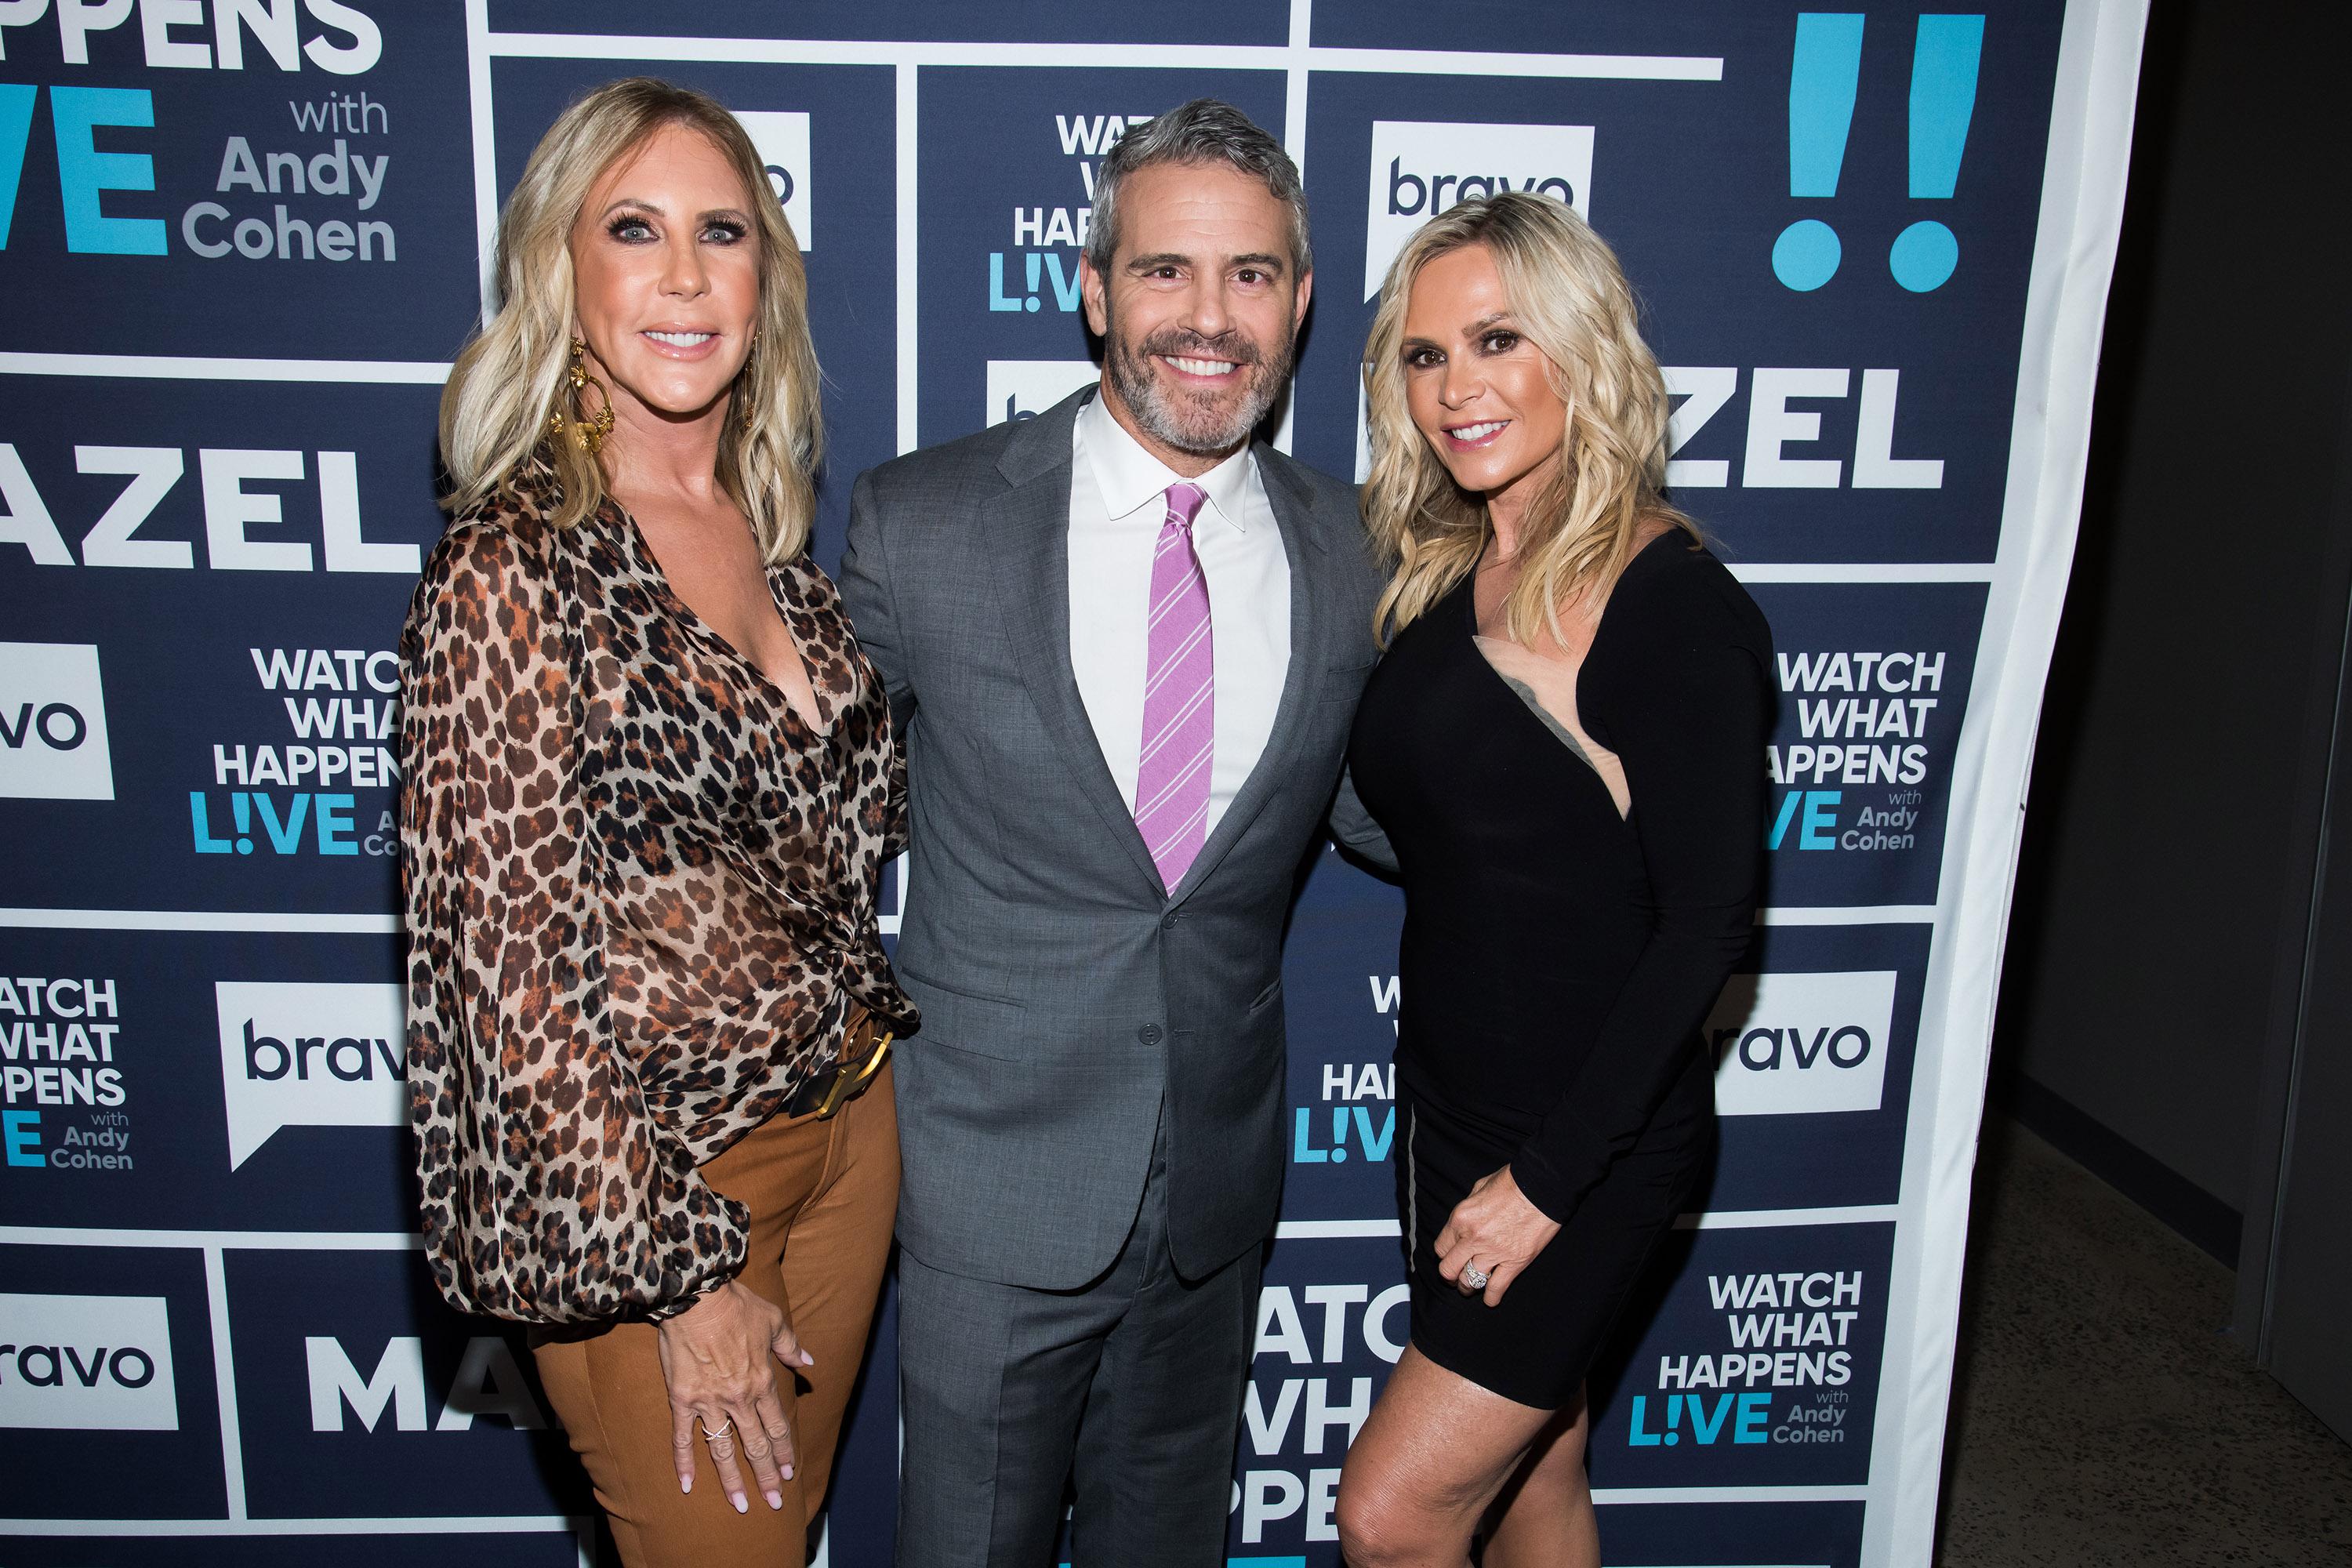 Tamra Judge Is Bringing Her Toxicity Back To RHOC, Andy Cohen Confirms